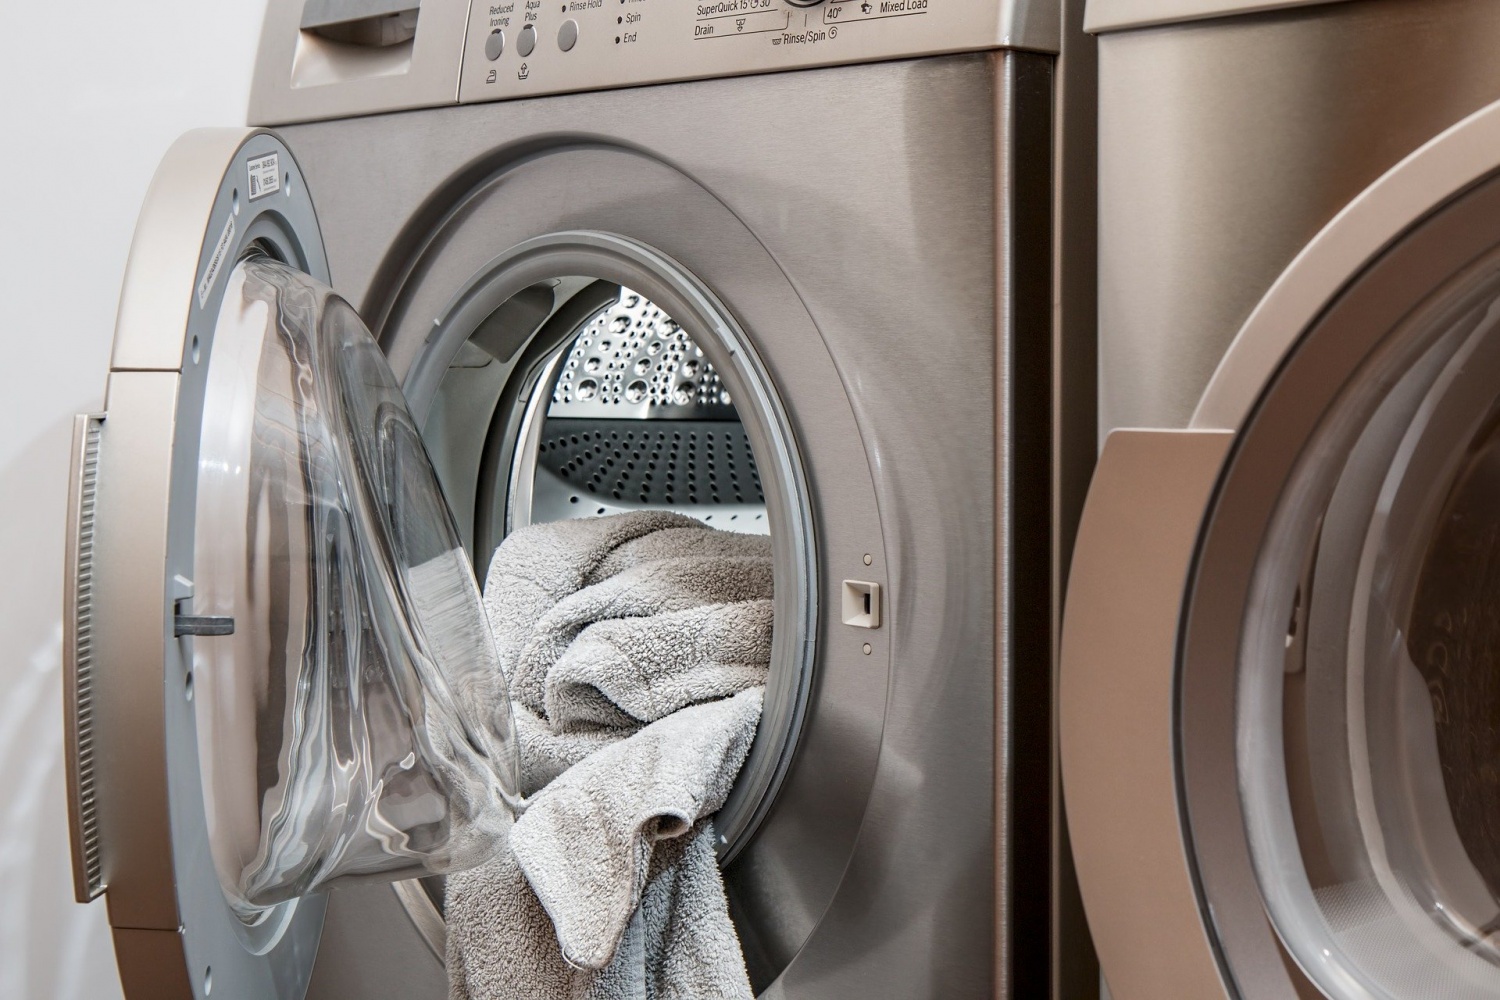 UC Students Uncover Major Security Flaw in Internet-Connected Laundry Machines : Tech : Tech Times